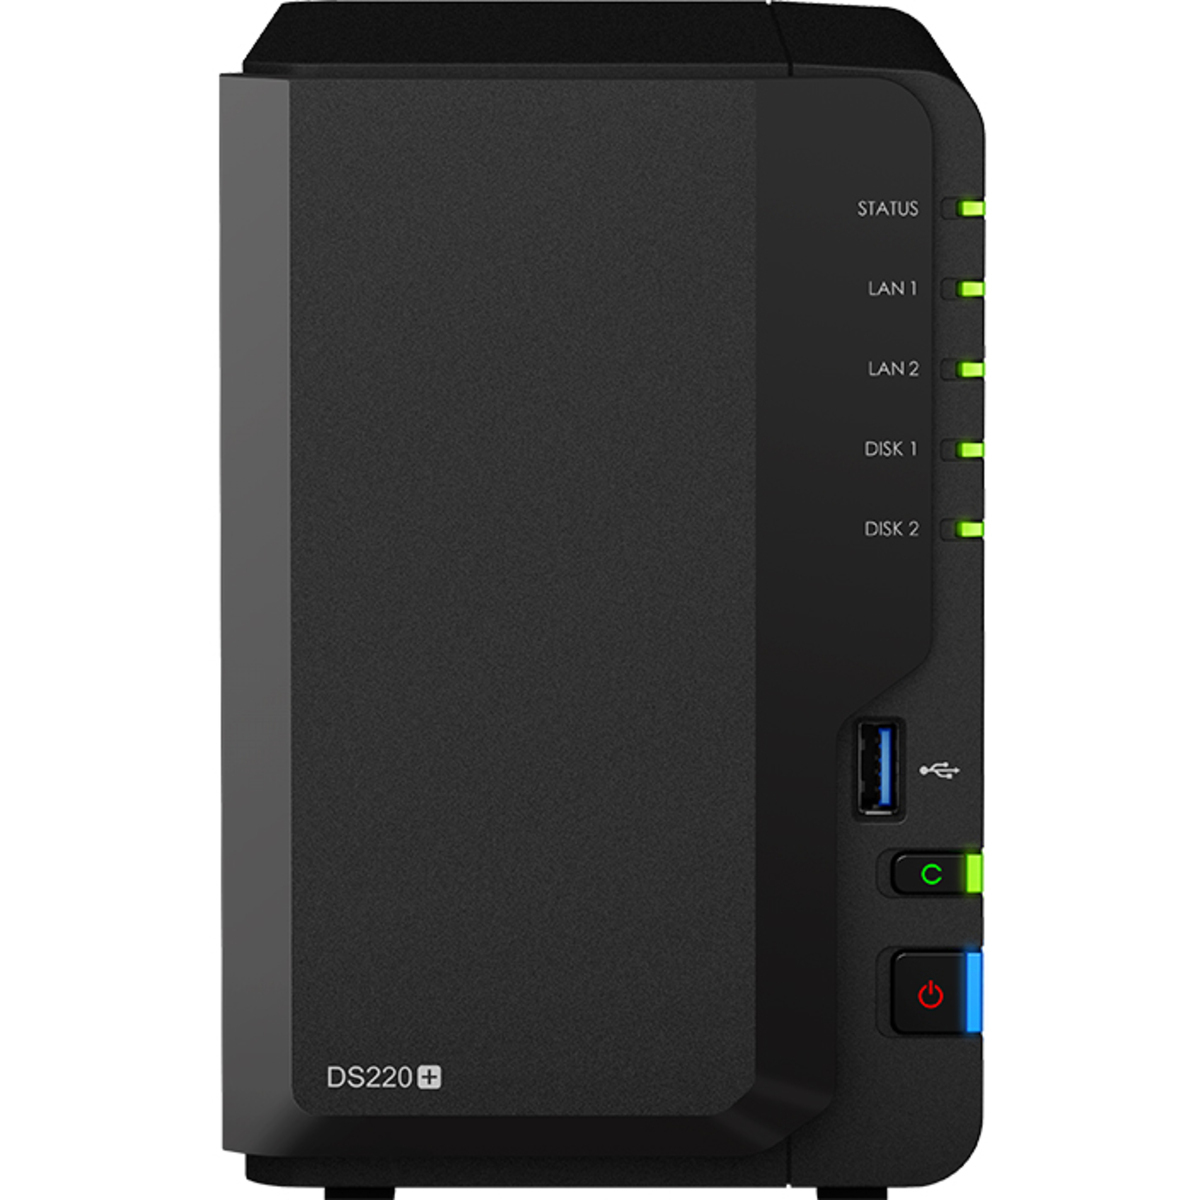 buy $937 Synology DiskStation DS220+ 4tb Desktop NAS - Network Attached Storage Device 2x2000gb Western Digital Red SA500 WDS200T1R0A 2.5 SATA 6Gb/s SSD NAS Class Drives Installed - Burn-In Tested - FREE RAM UPGRADE - nas headquarters buy network attached storage server device das new raid-5 free shipping usa DiskStation DS220+